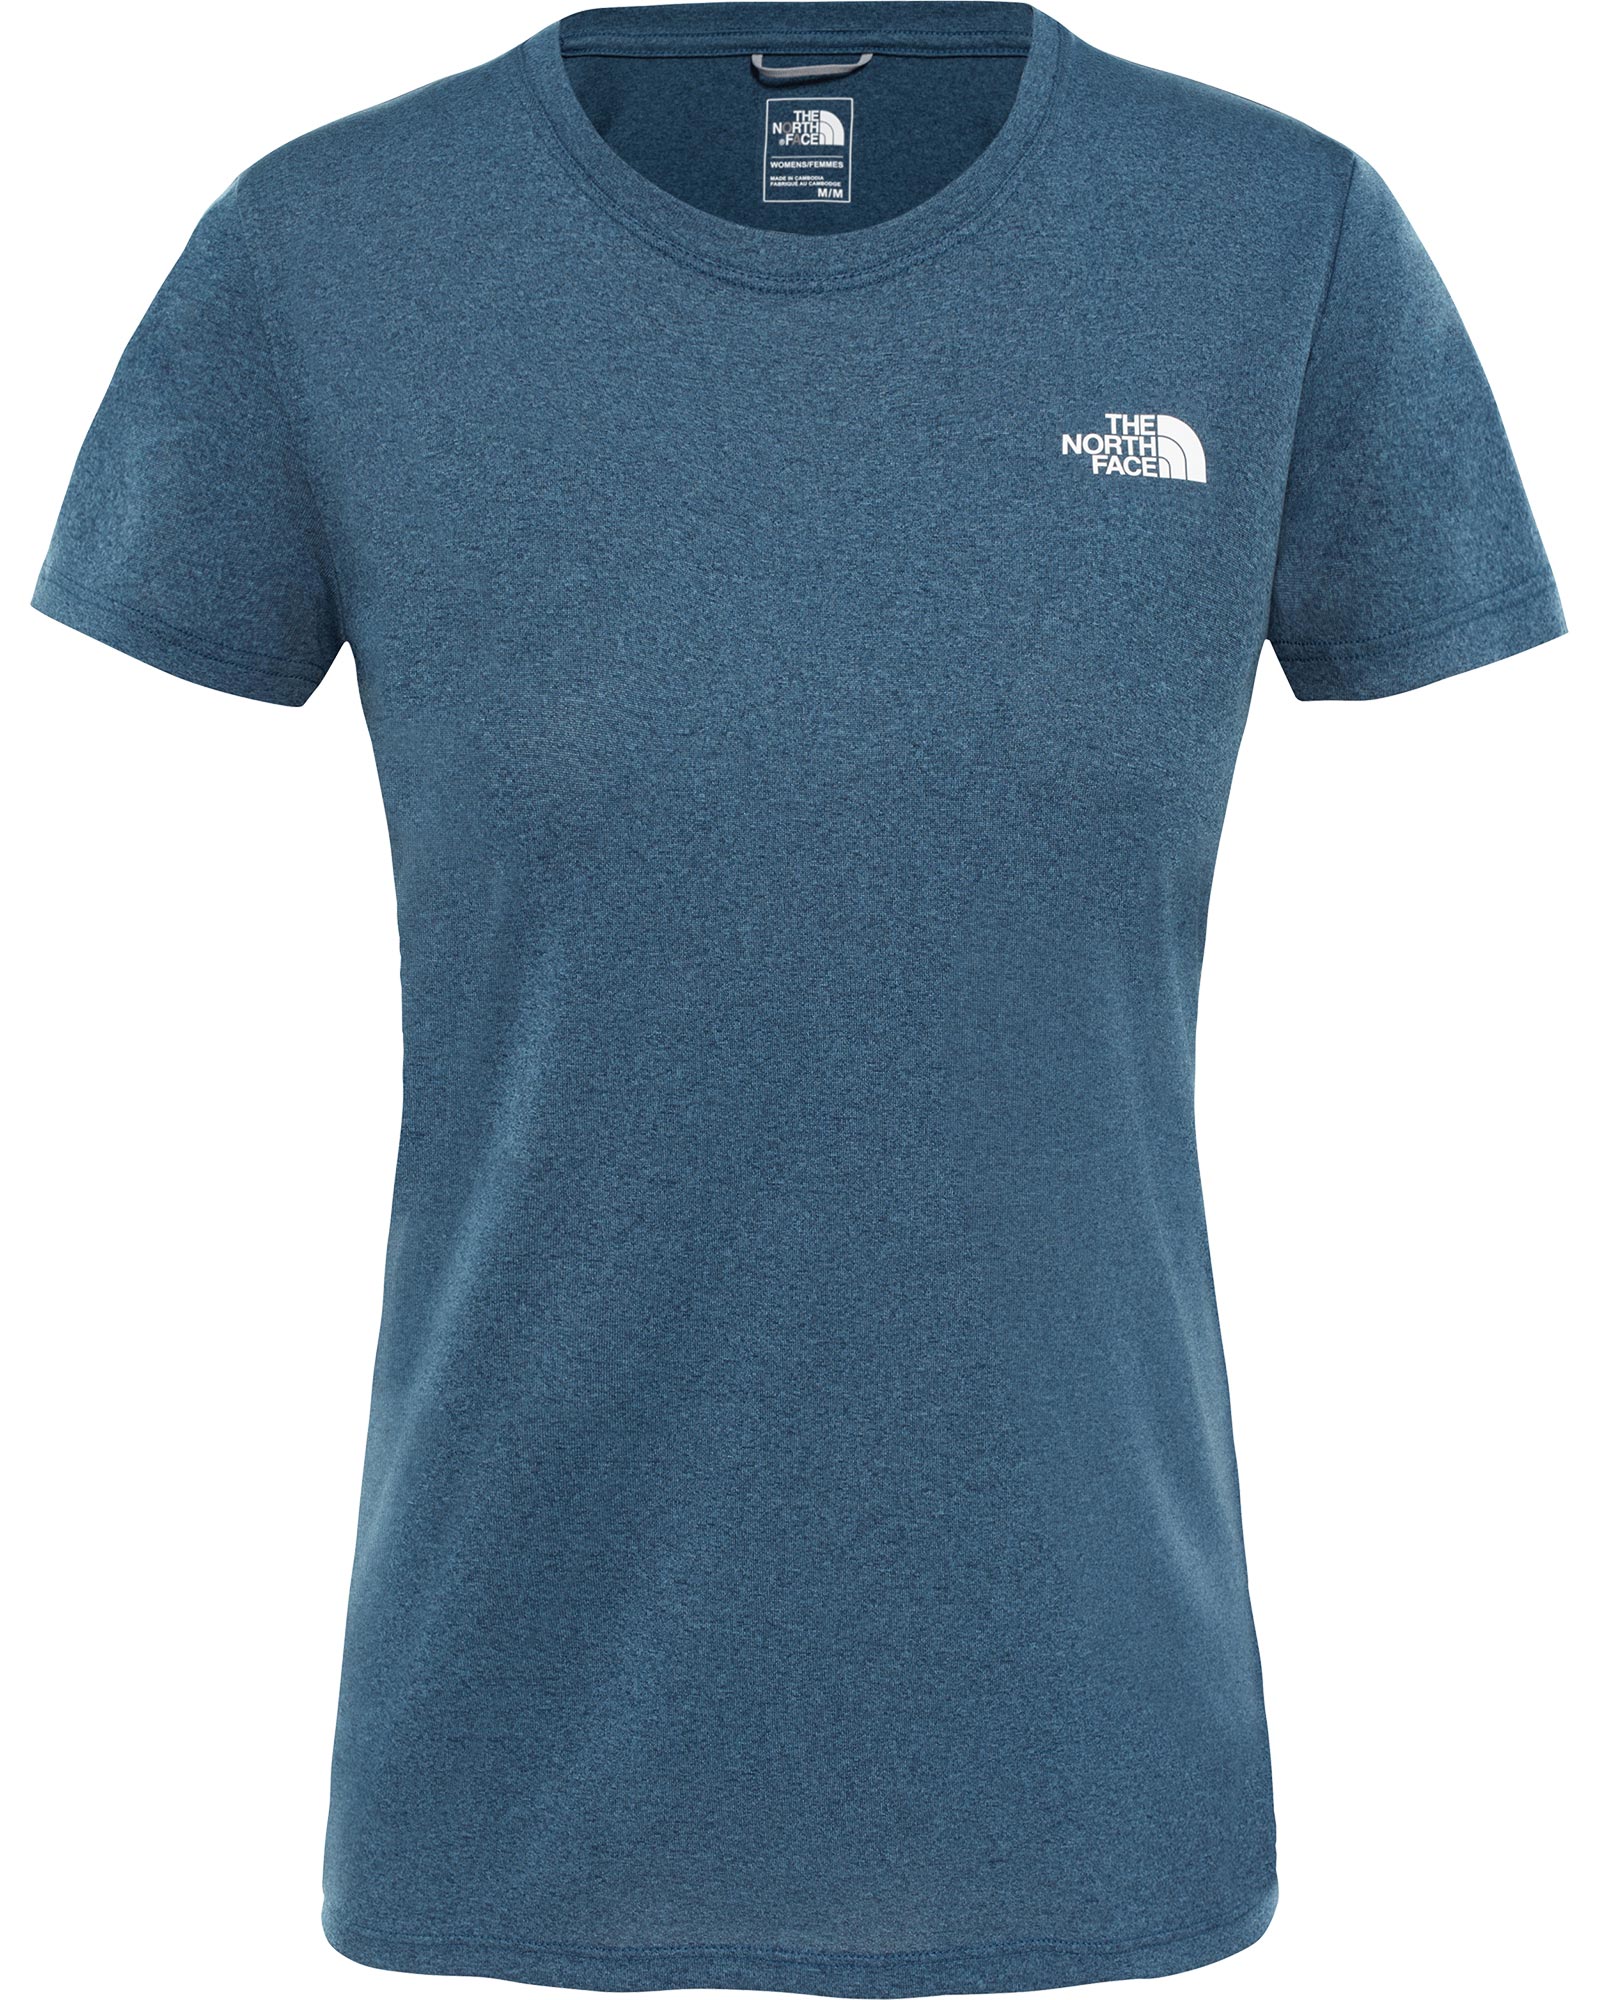 The North Face Reaxion Amp Women’s Crew T Shirt - Blue Wing Teal Heather XS